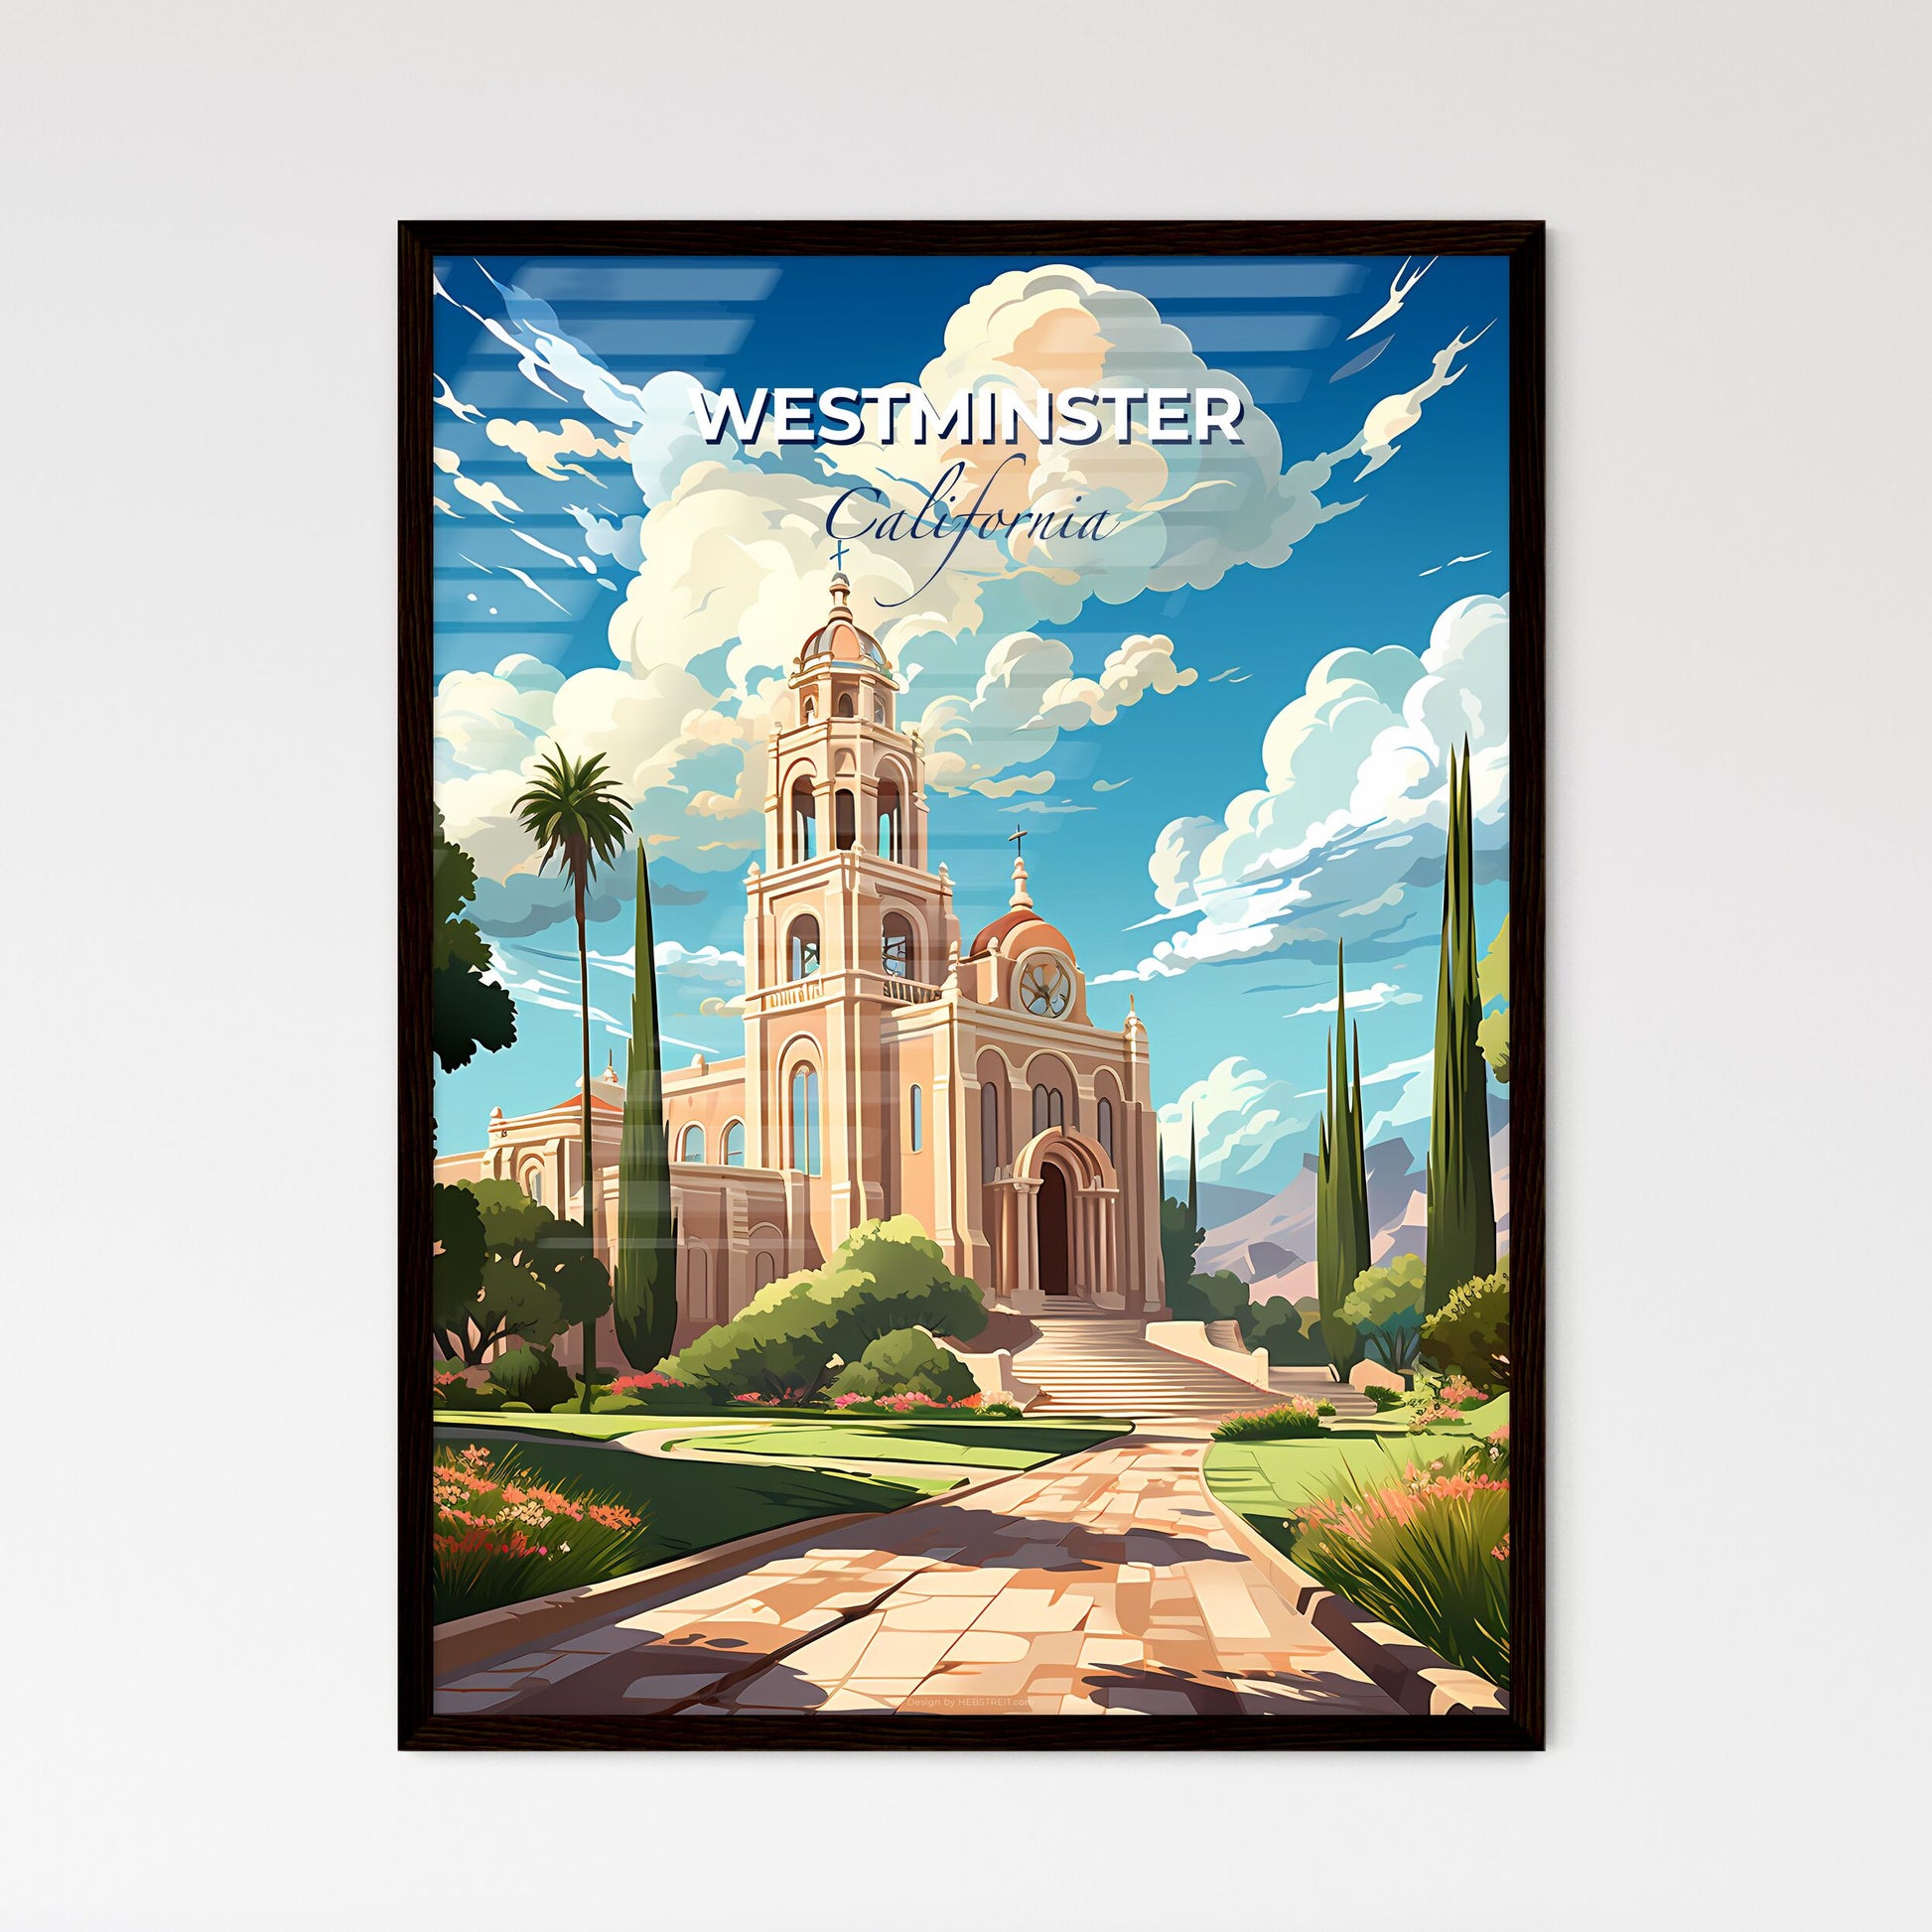 Westminster, California, A Poster of a building with a tower and a path Default Title